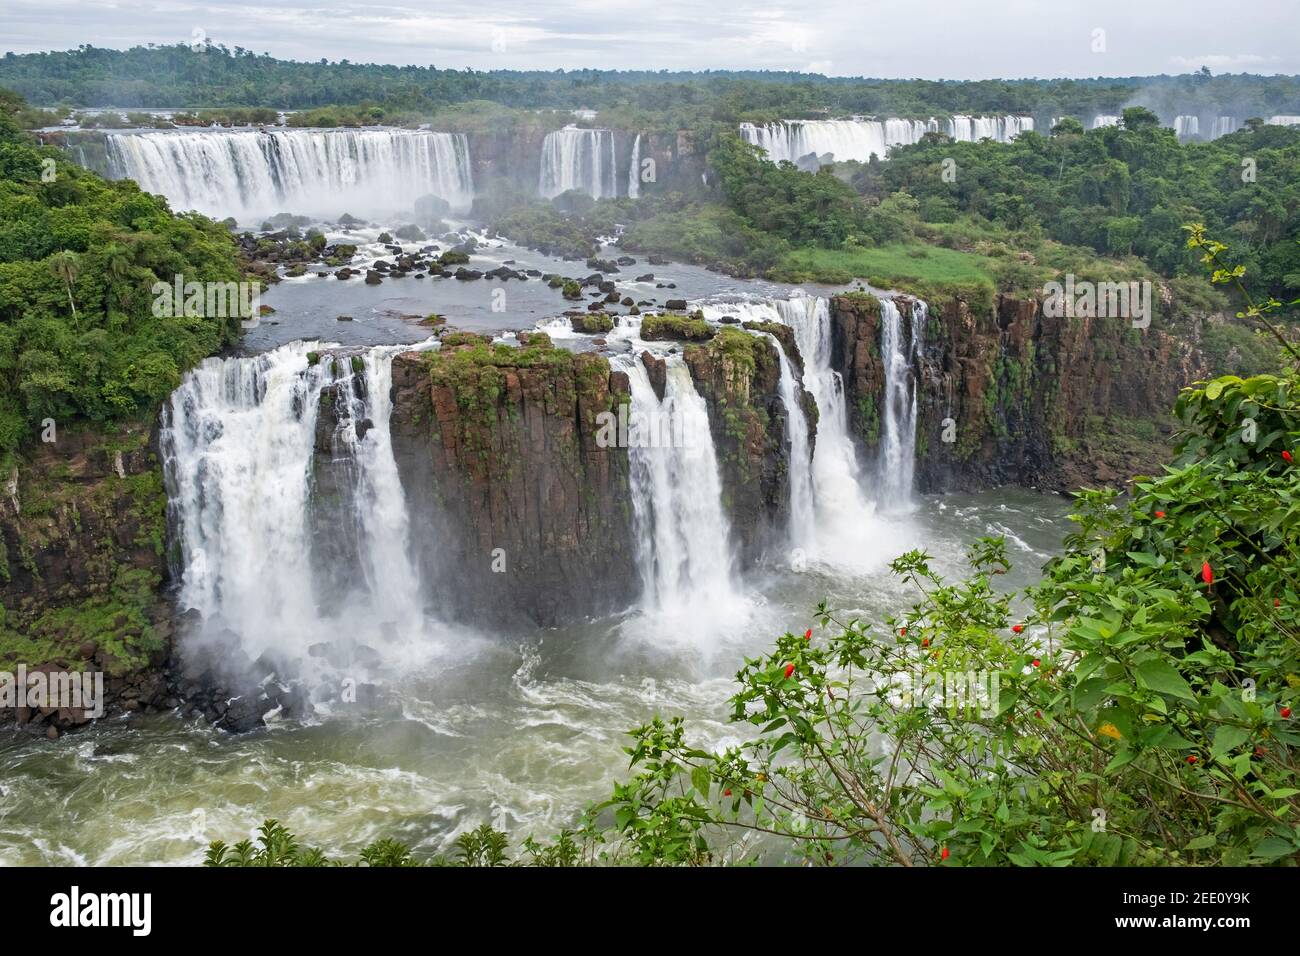 Iguazú Falls / Iguaçu Falls, waterfalls of the Iguazu River on the border of the Argentine province of Misiones and the Brazilian state of Paraná Stock Photo